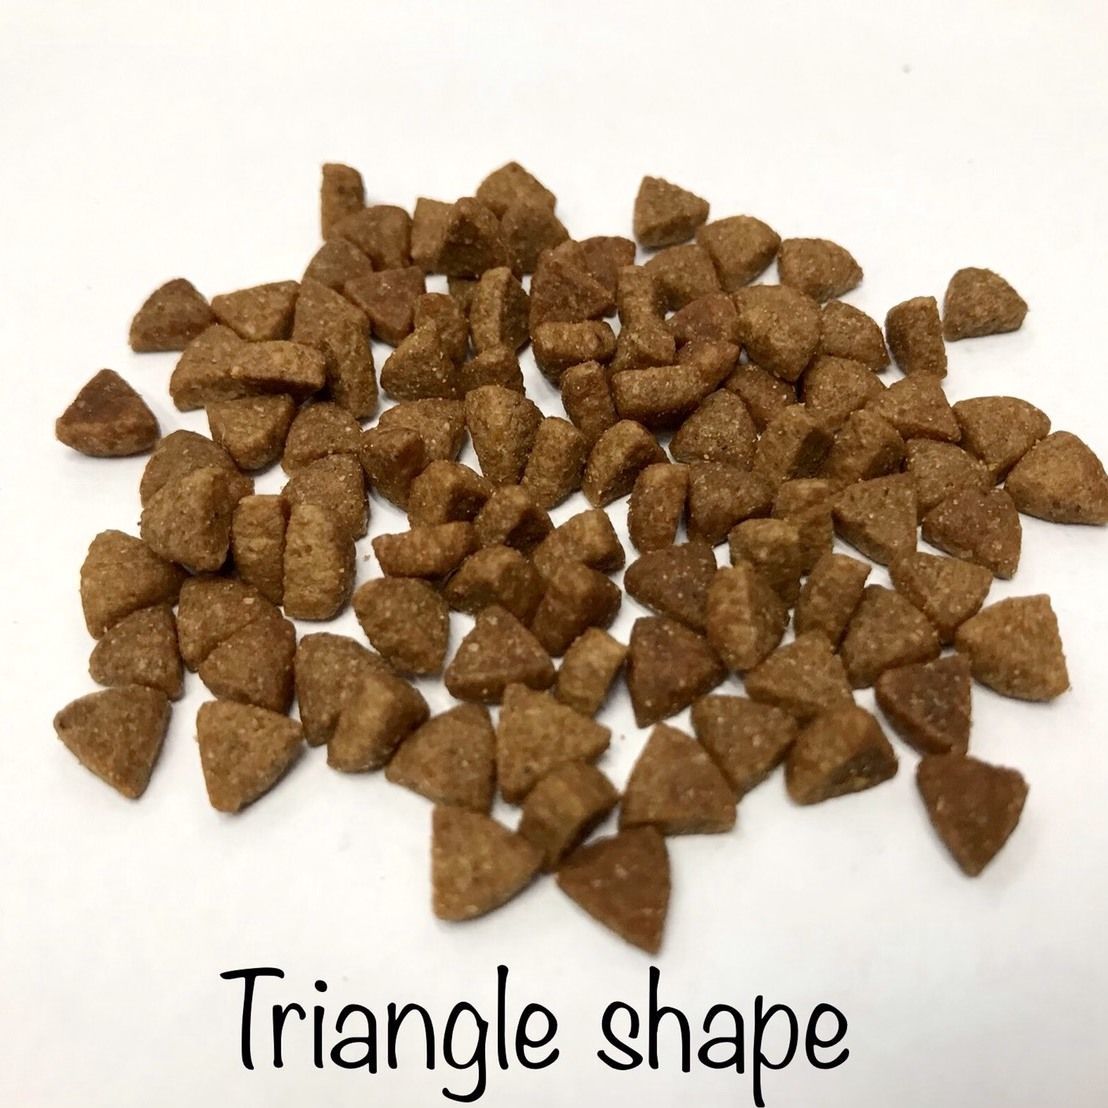 dog food Puppy and small dog breeds Weight : 500 g , 1 kg , 3.5 kg , 20 kg Guaranteed analysis ; Protein 26% Fat 7% Fiber 5% Moisture 10% All our product is made with high quality ingredients and prod